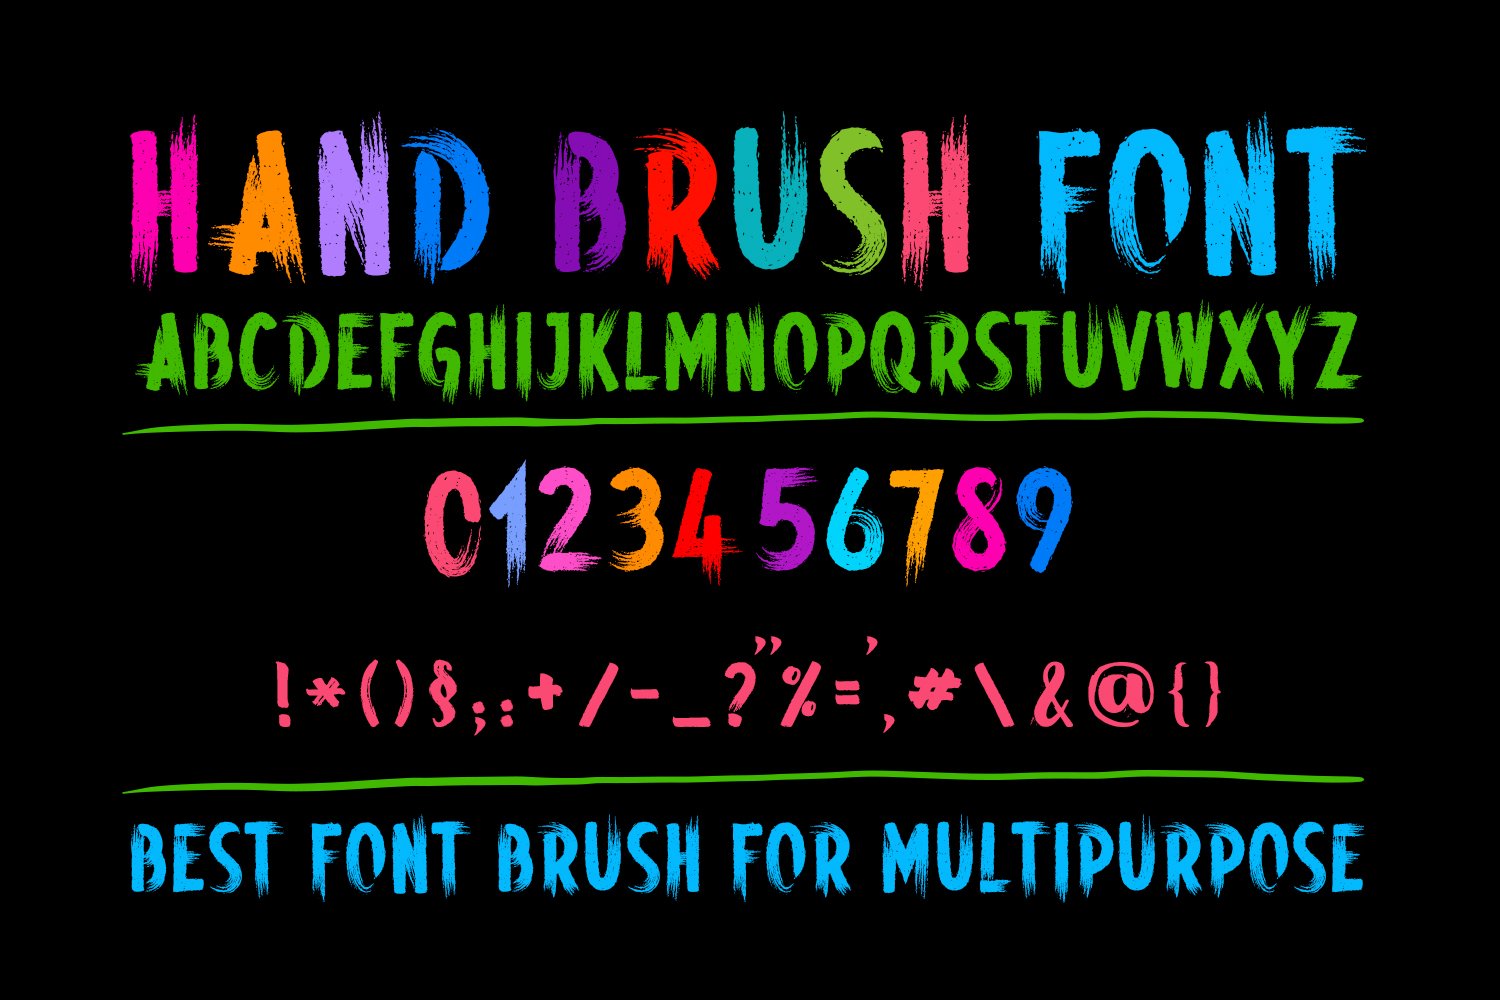 Hand Brush Font cover image.